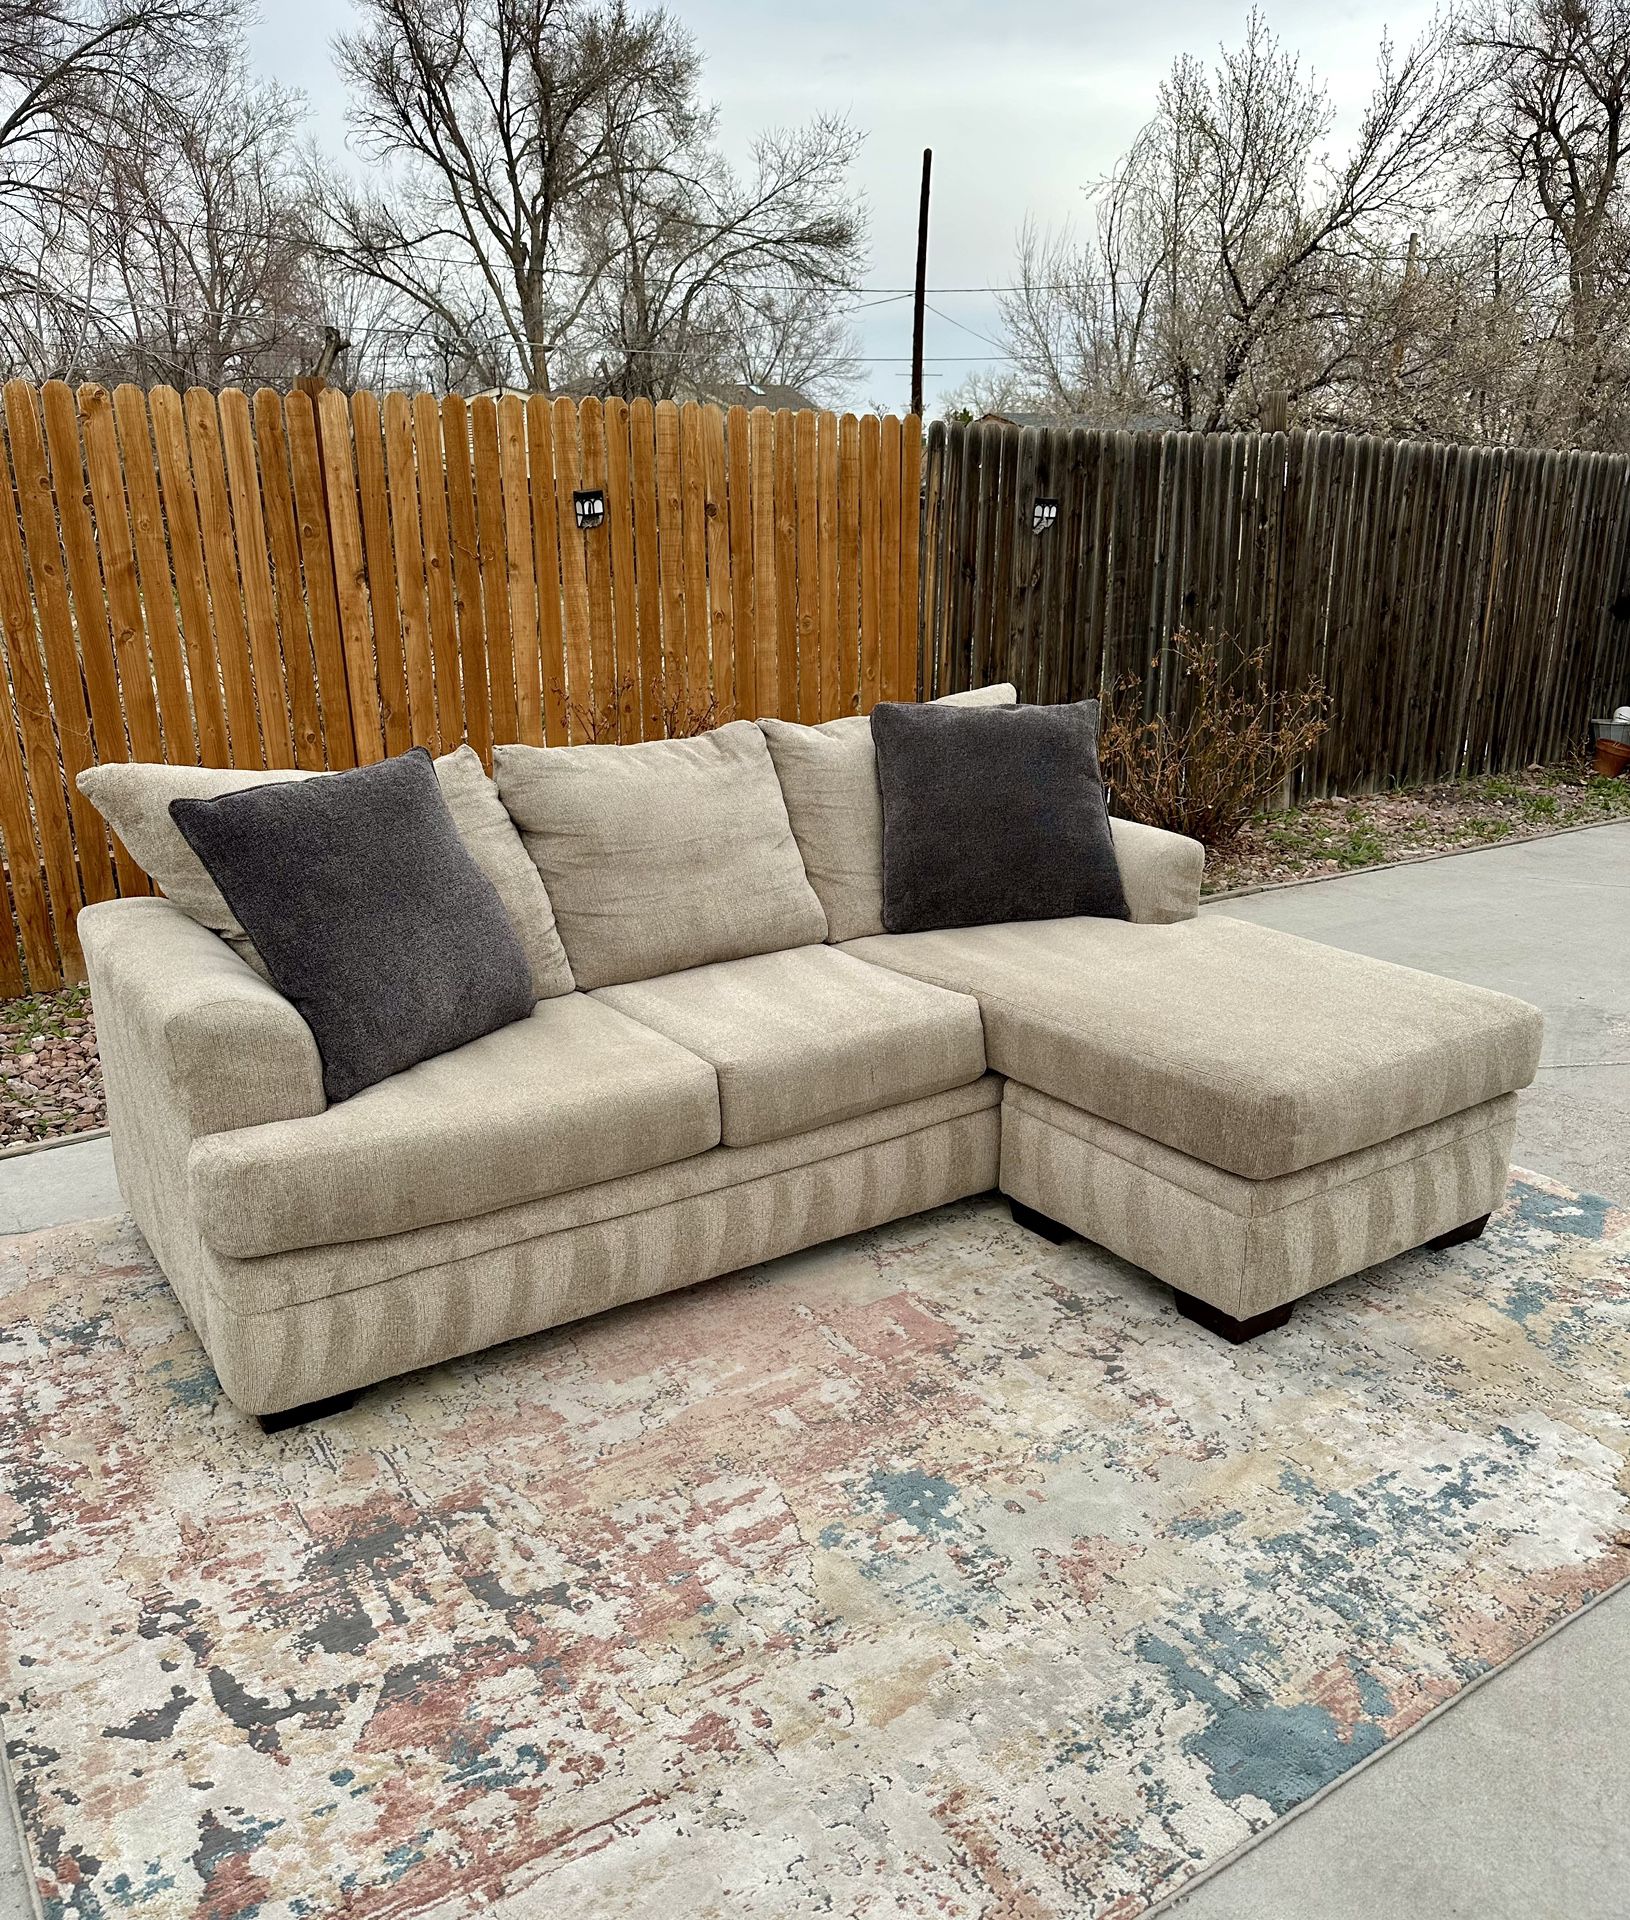 🚚 FREE DELIVERY ! Beautiful Beige Sectional Couch w/ Chaise